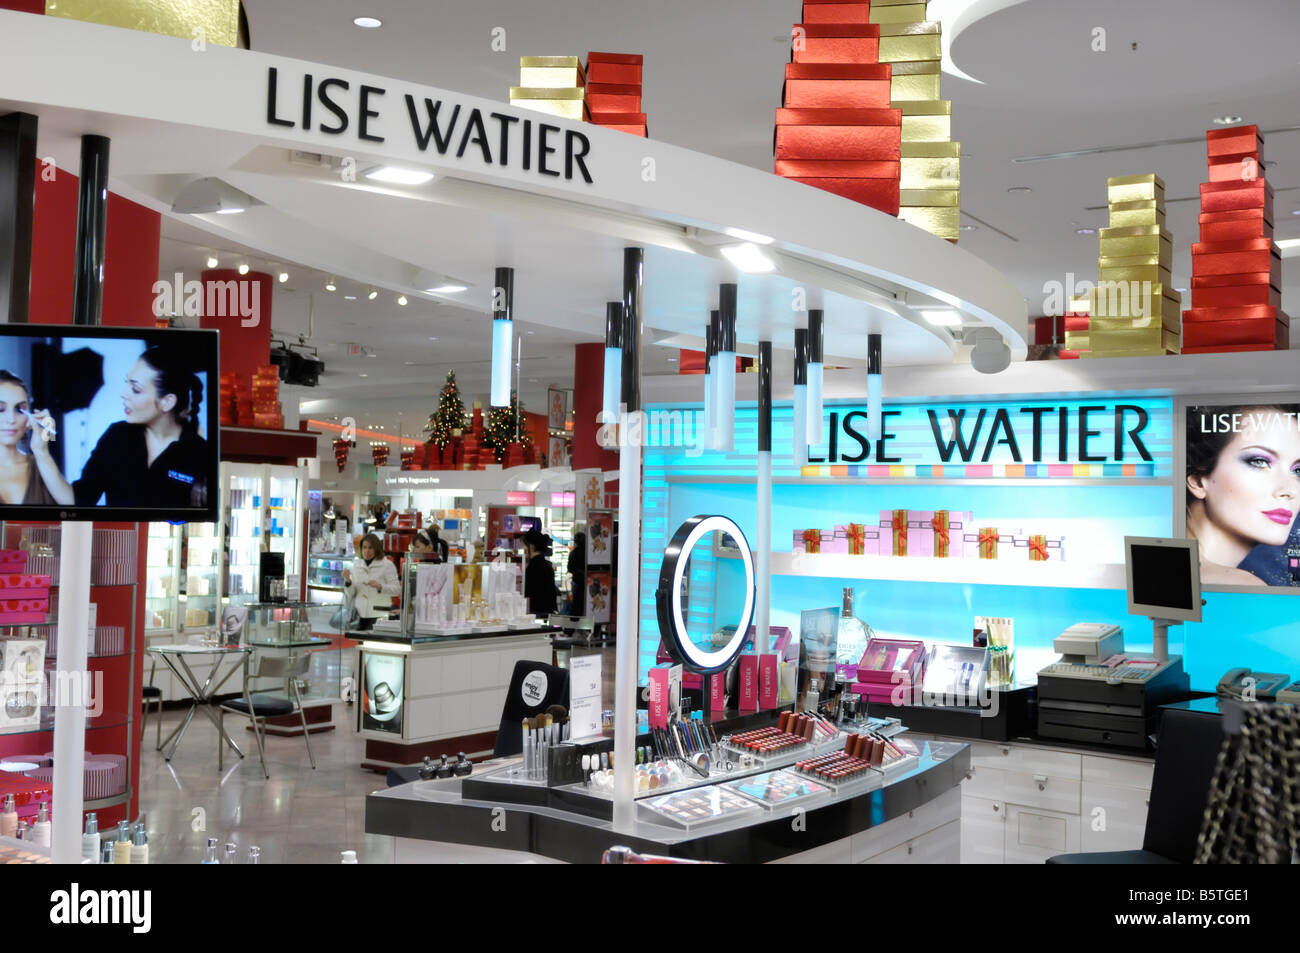 Lise Watier cosmetics display in a shopping mall Stock Photo